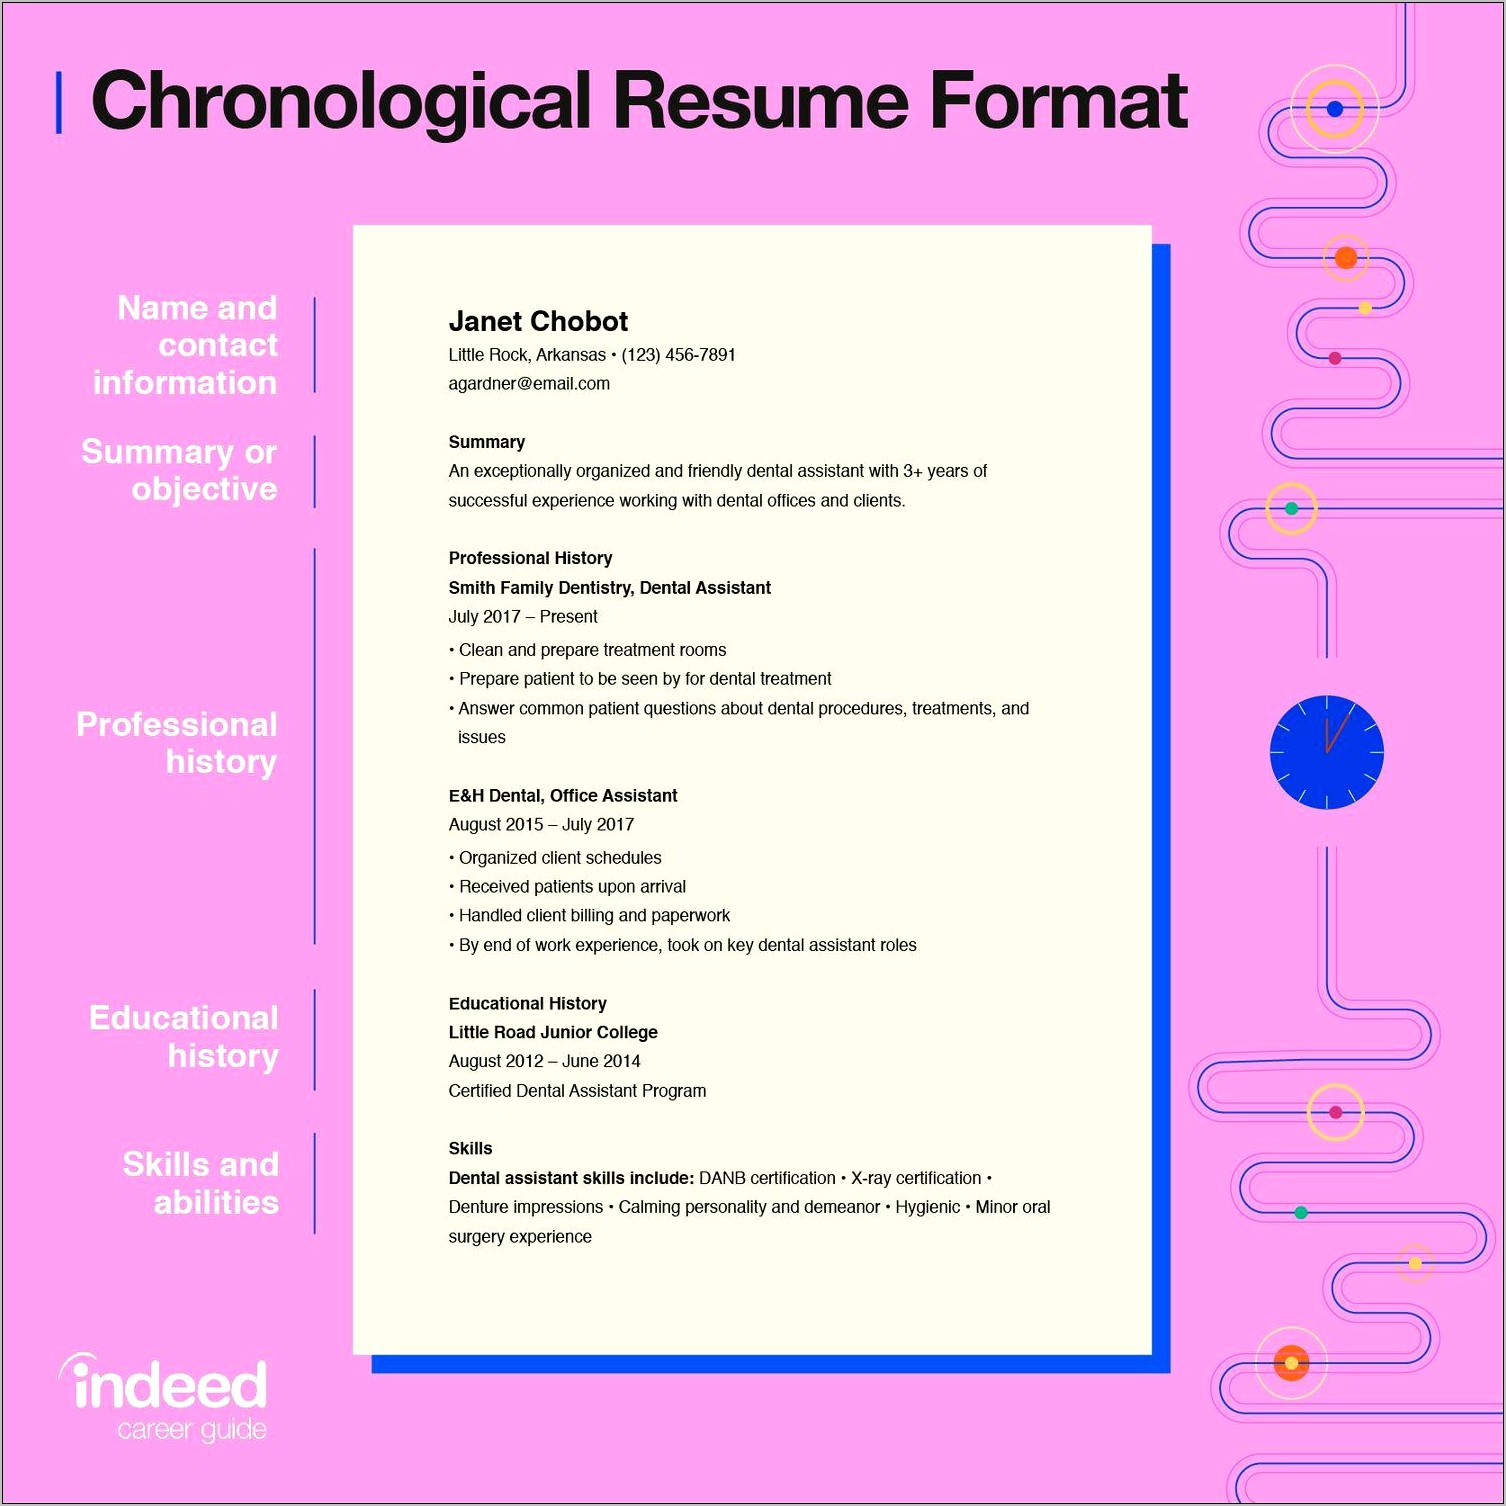 Sample Resume Format For 5 Years Experience